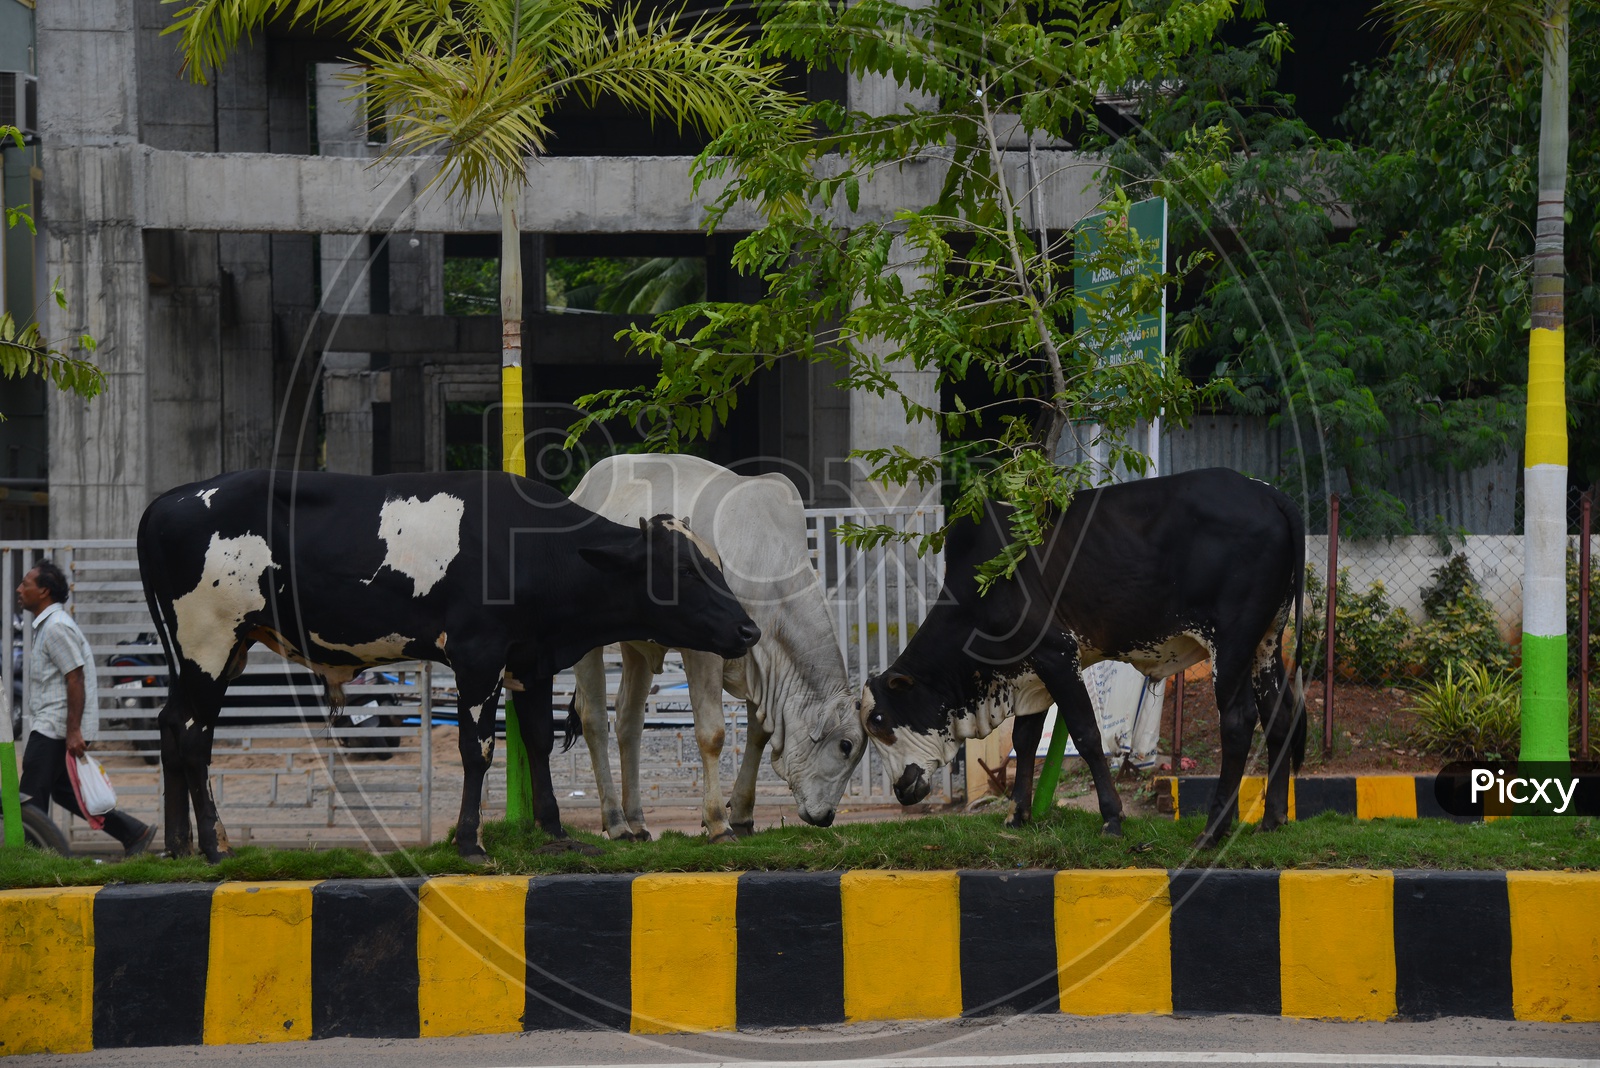 Stray cows grazing grass on the road divider